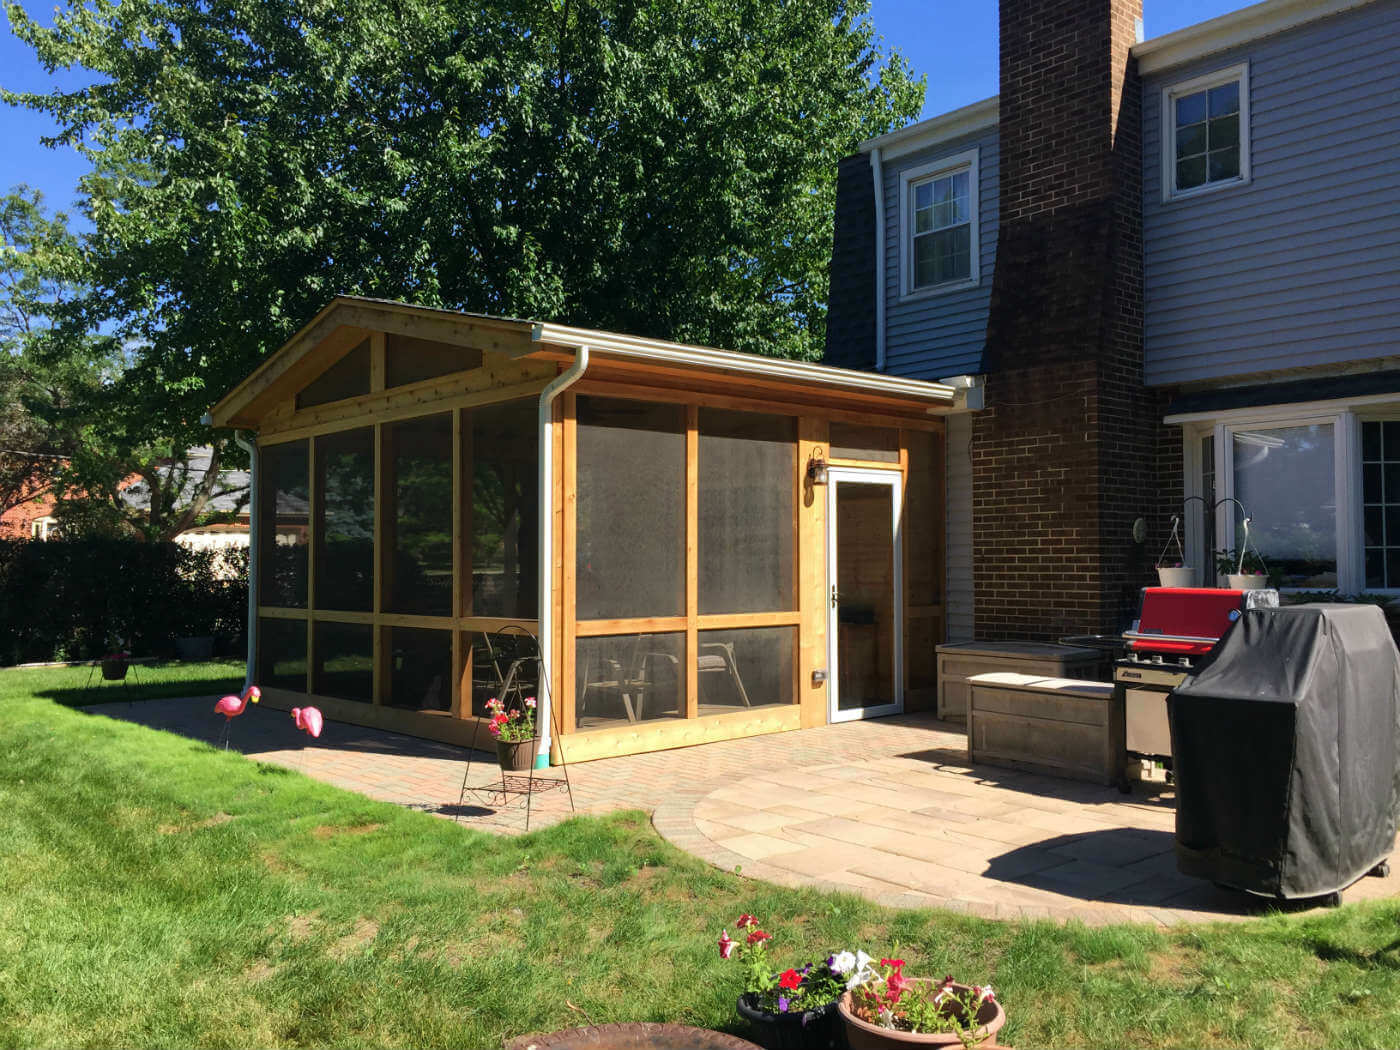 Custom screened porch and patio combination